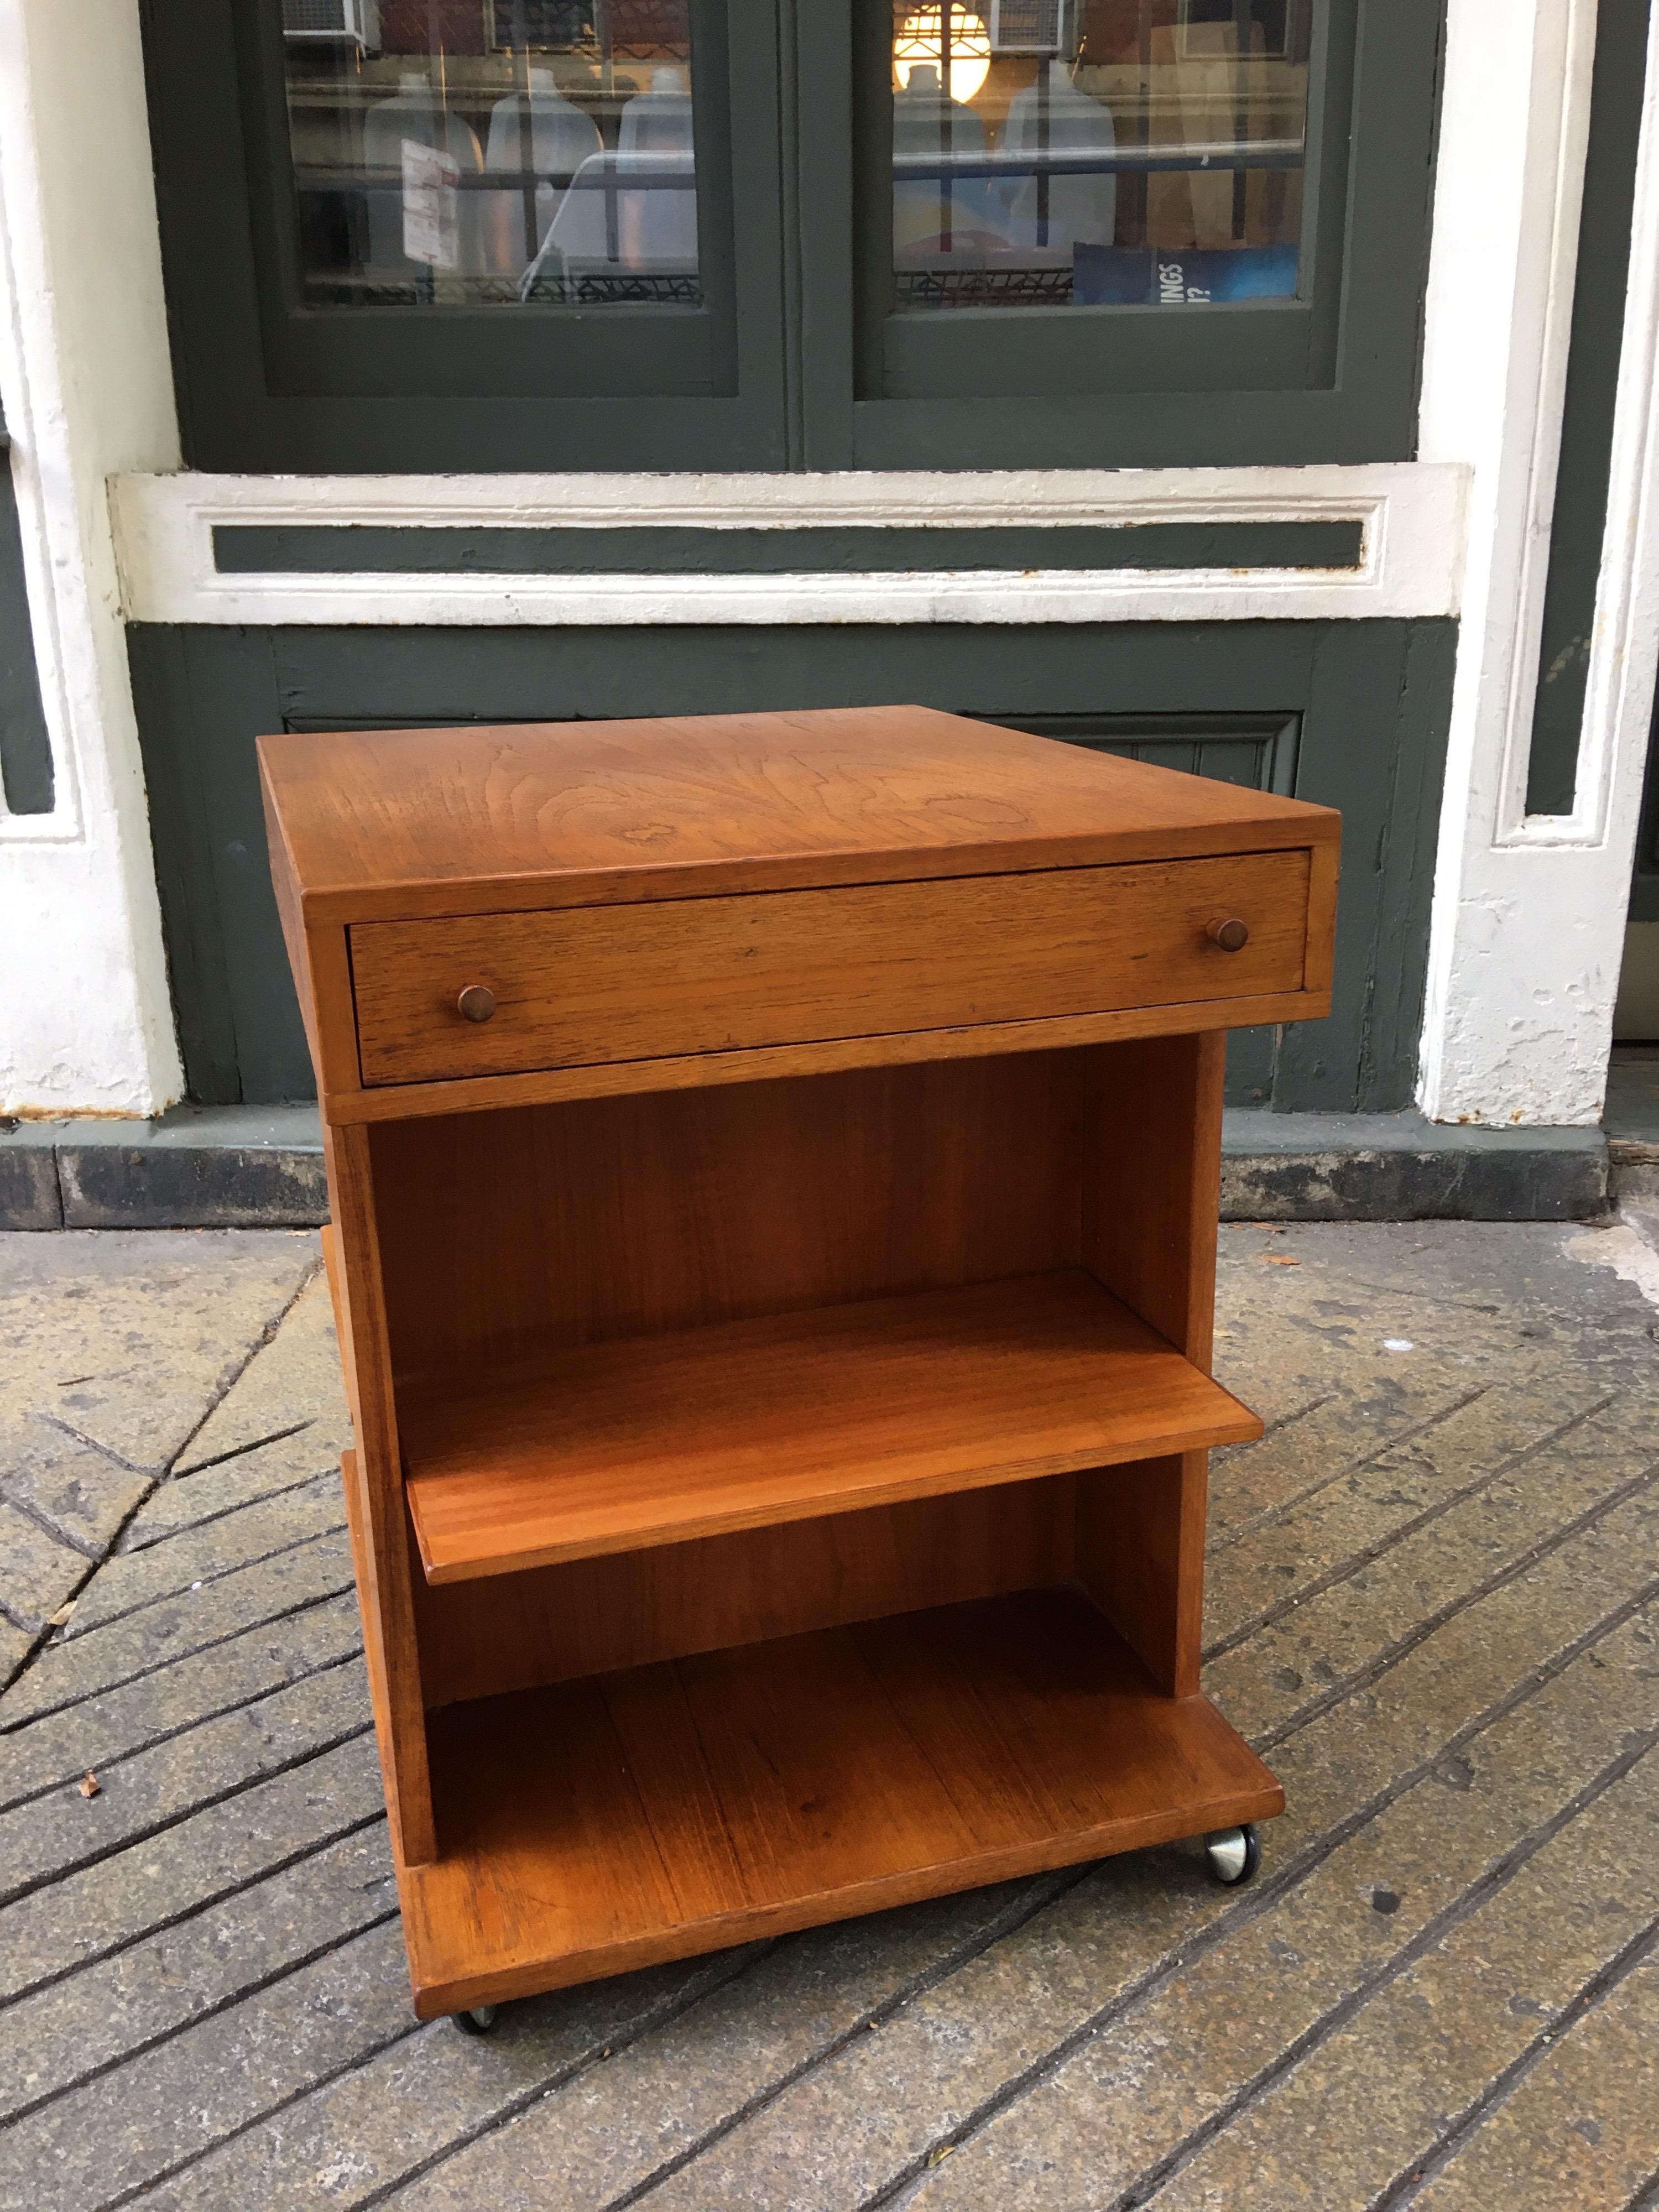 Teak end table with one-drawer and adjustable shelves. Table is on wheels which makes it easy to rotate and use in different places! Probably dates from the 1970s original condition is good! Perfect to use as a nightstand, end table or in the office!